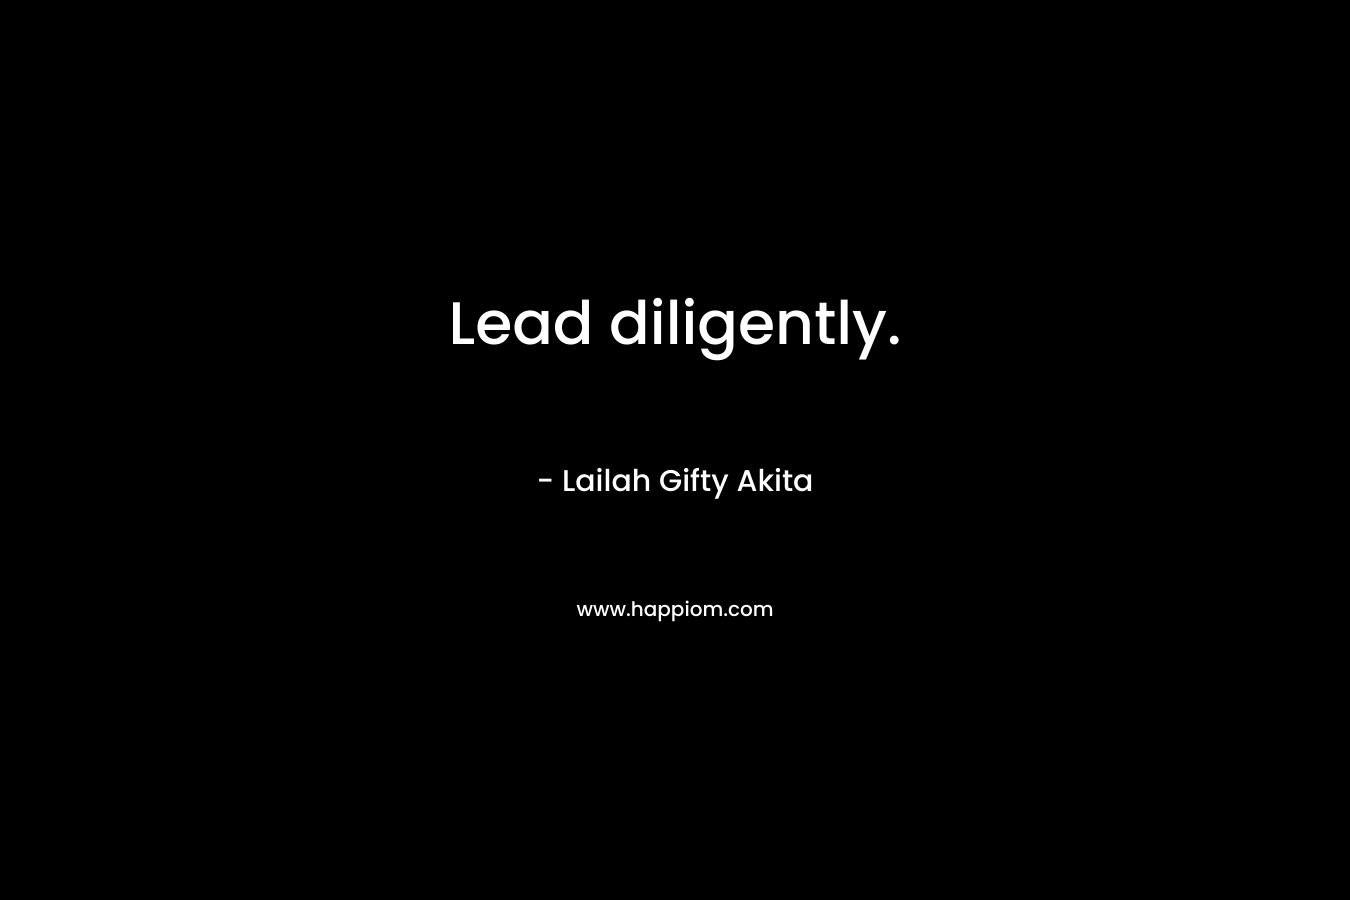 Lead diligently.